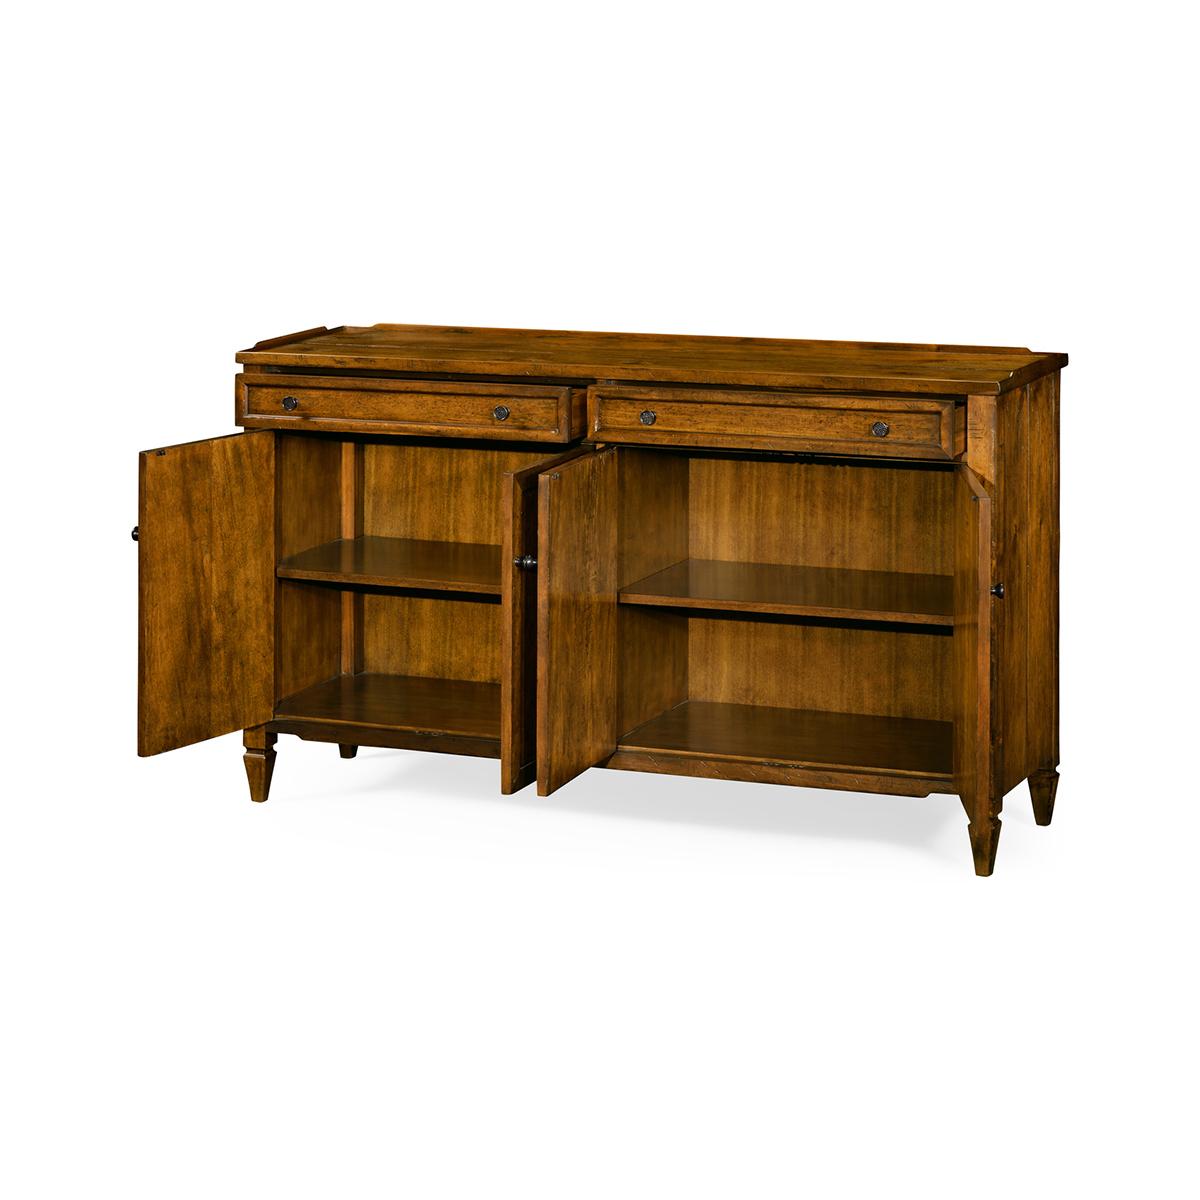 Vietnamese Rustic Country Walnut Sideboard For Sale